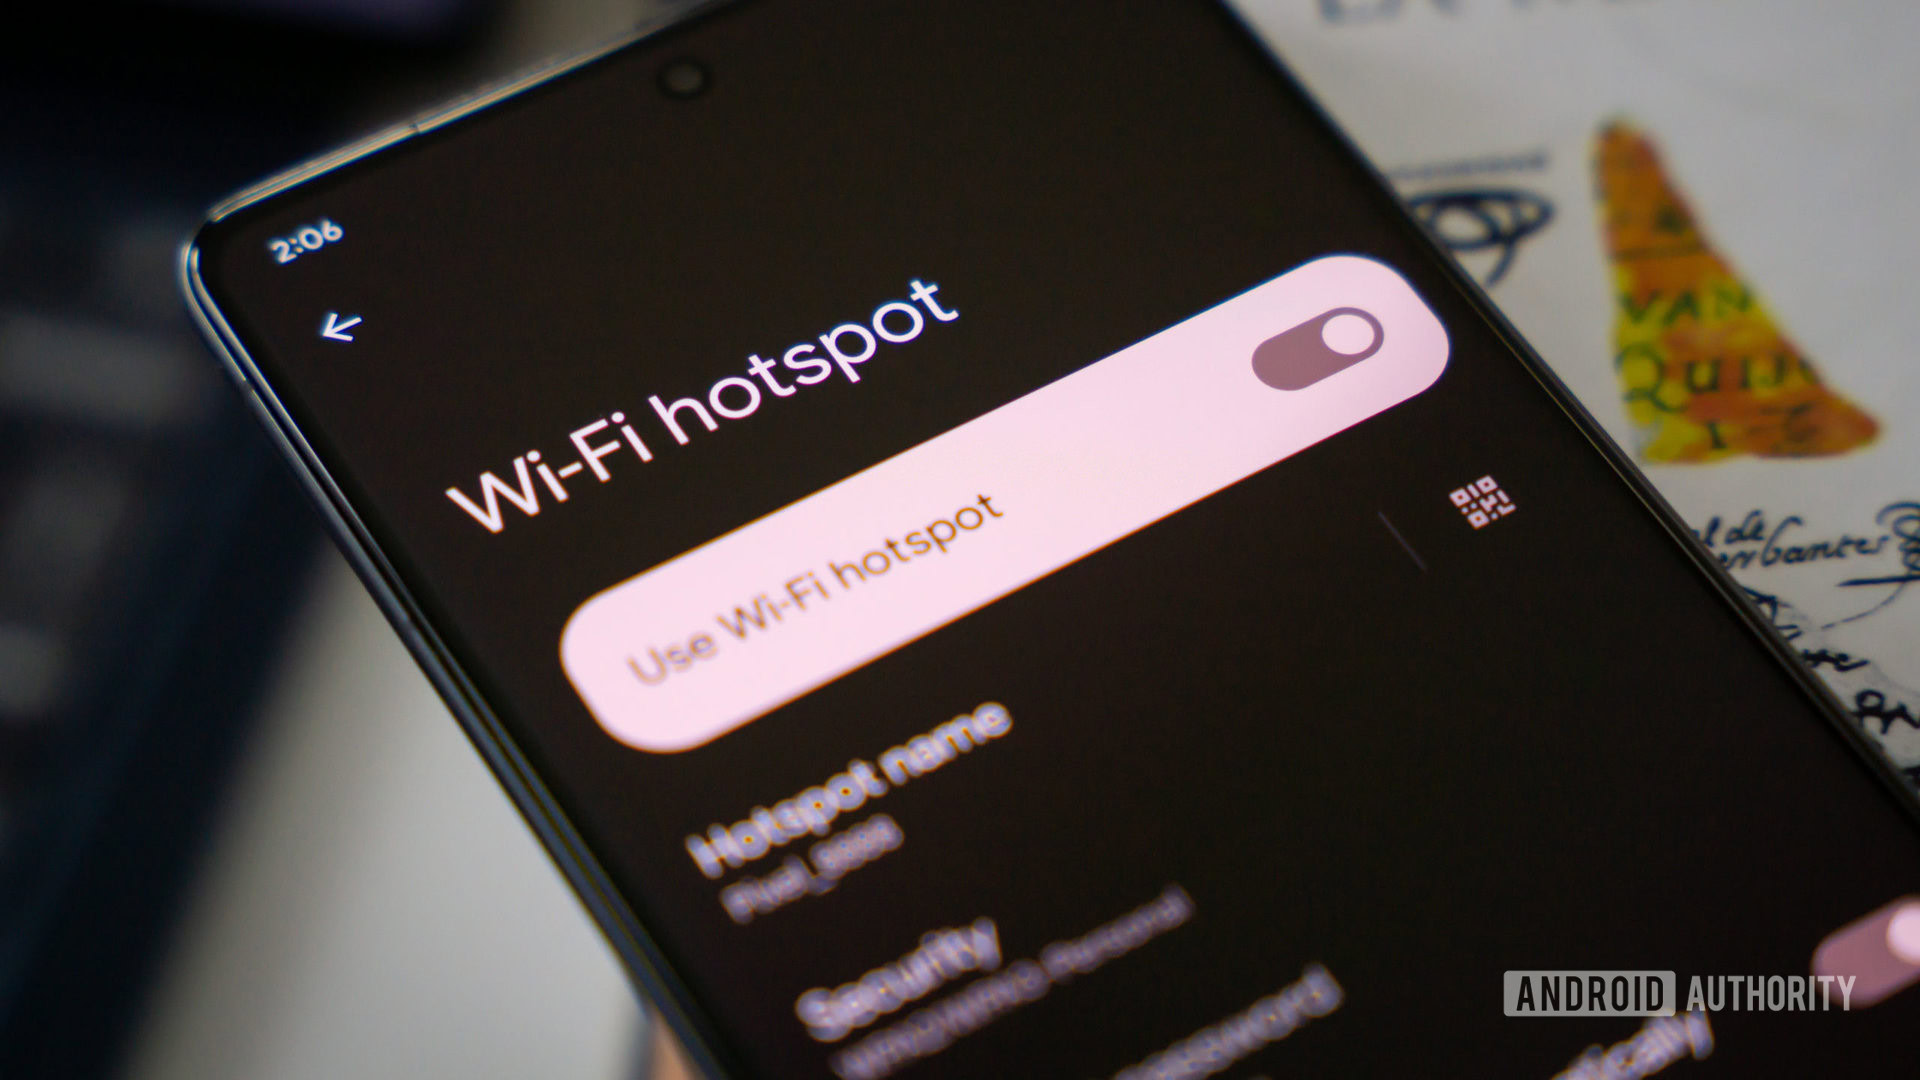 What are Portable Wi-Fi Hotspots, and How Do They Work?